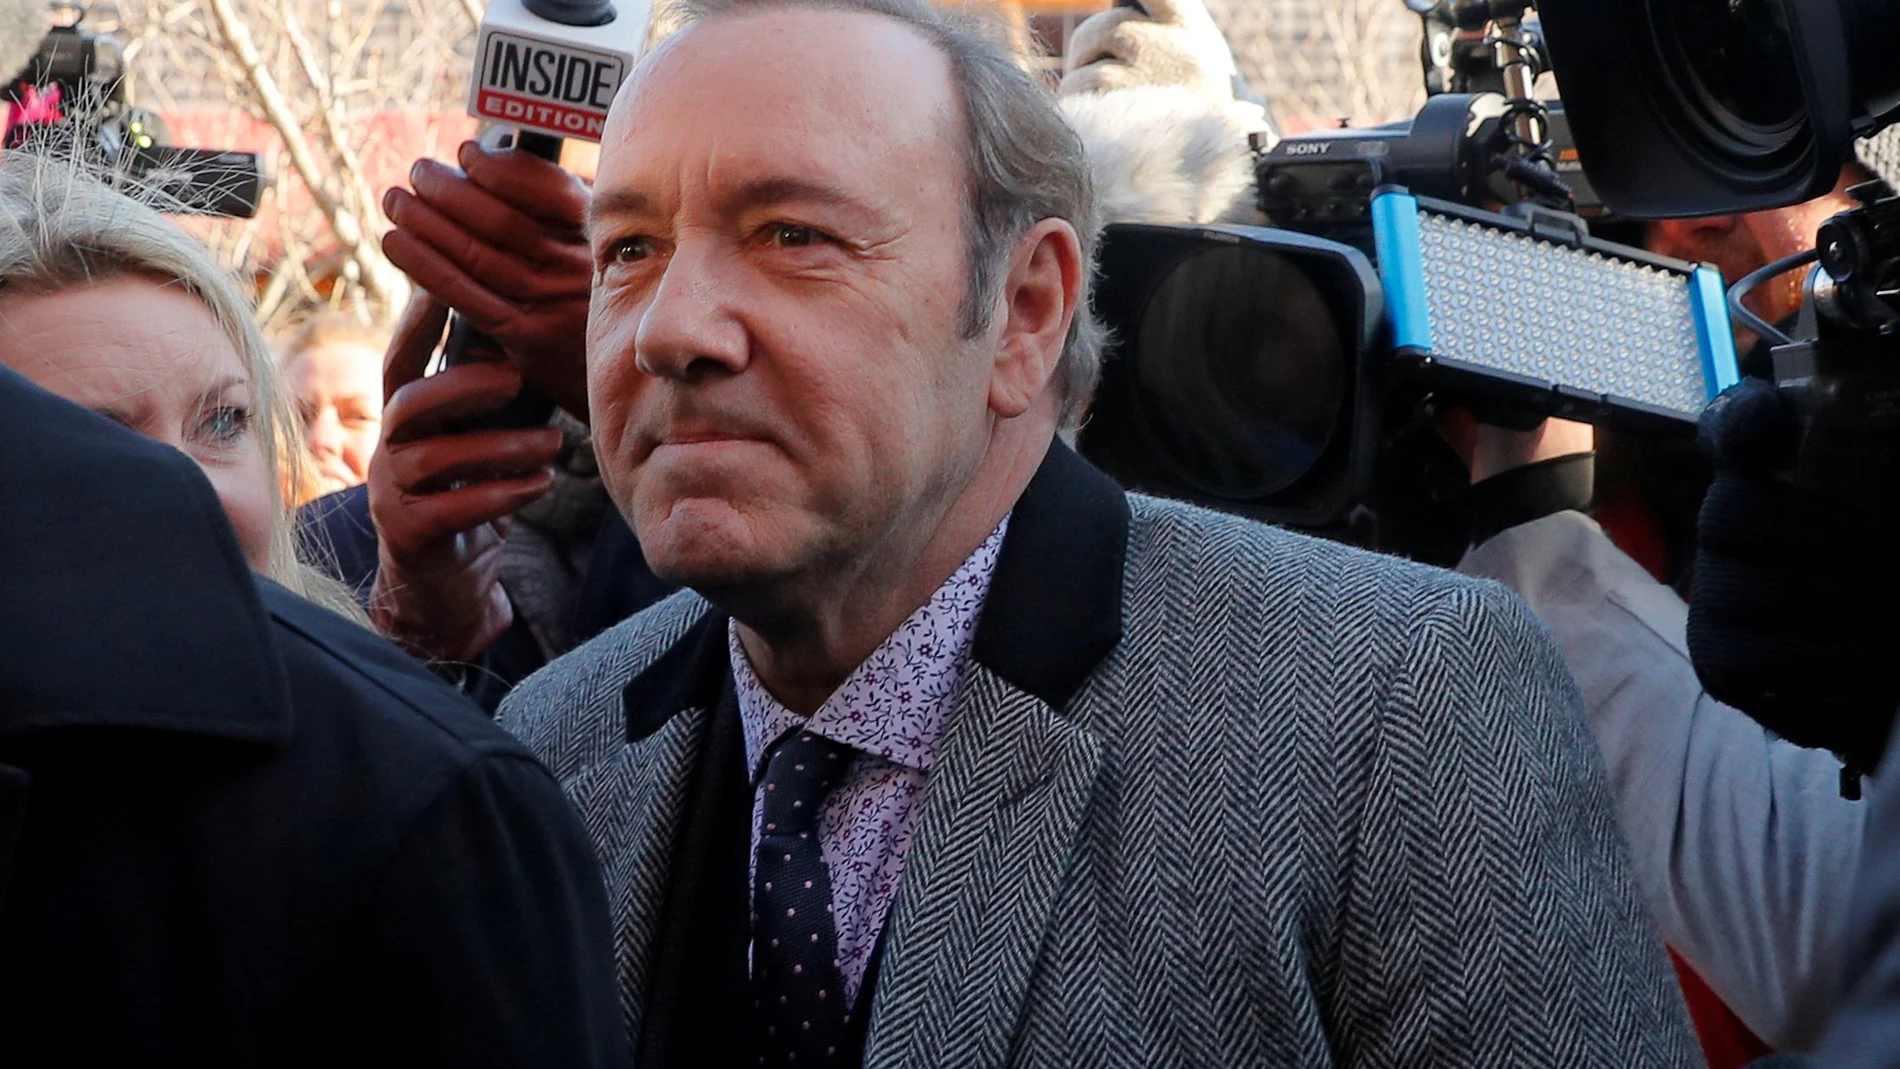 FILE PHOTO: Actor Kevin Spacey arrives to face a sexual assault charge at Nantucket District Court in Nantucket